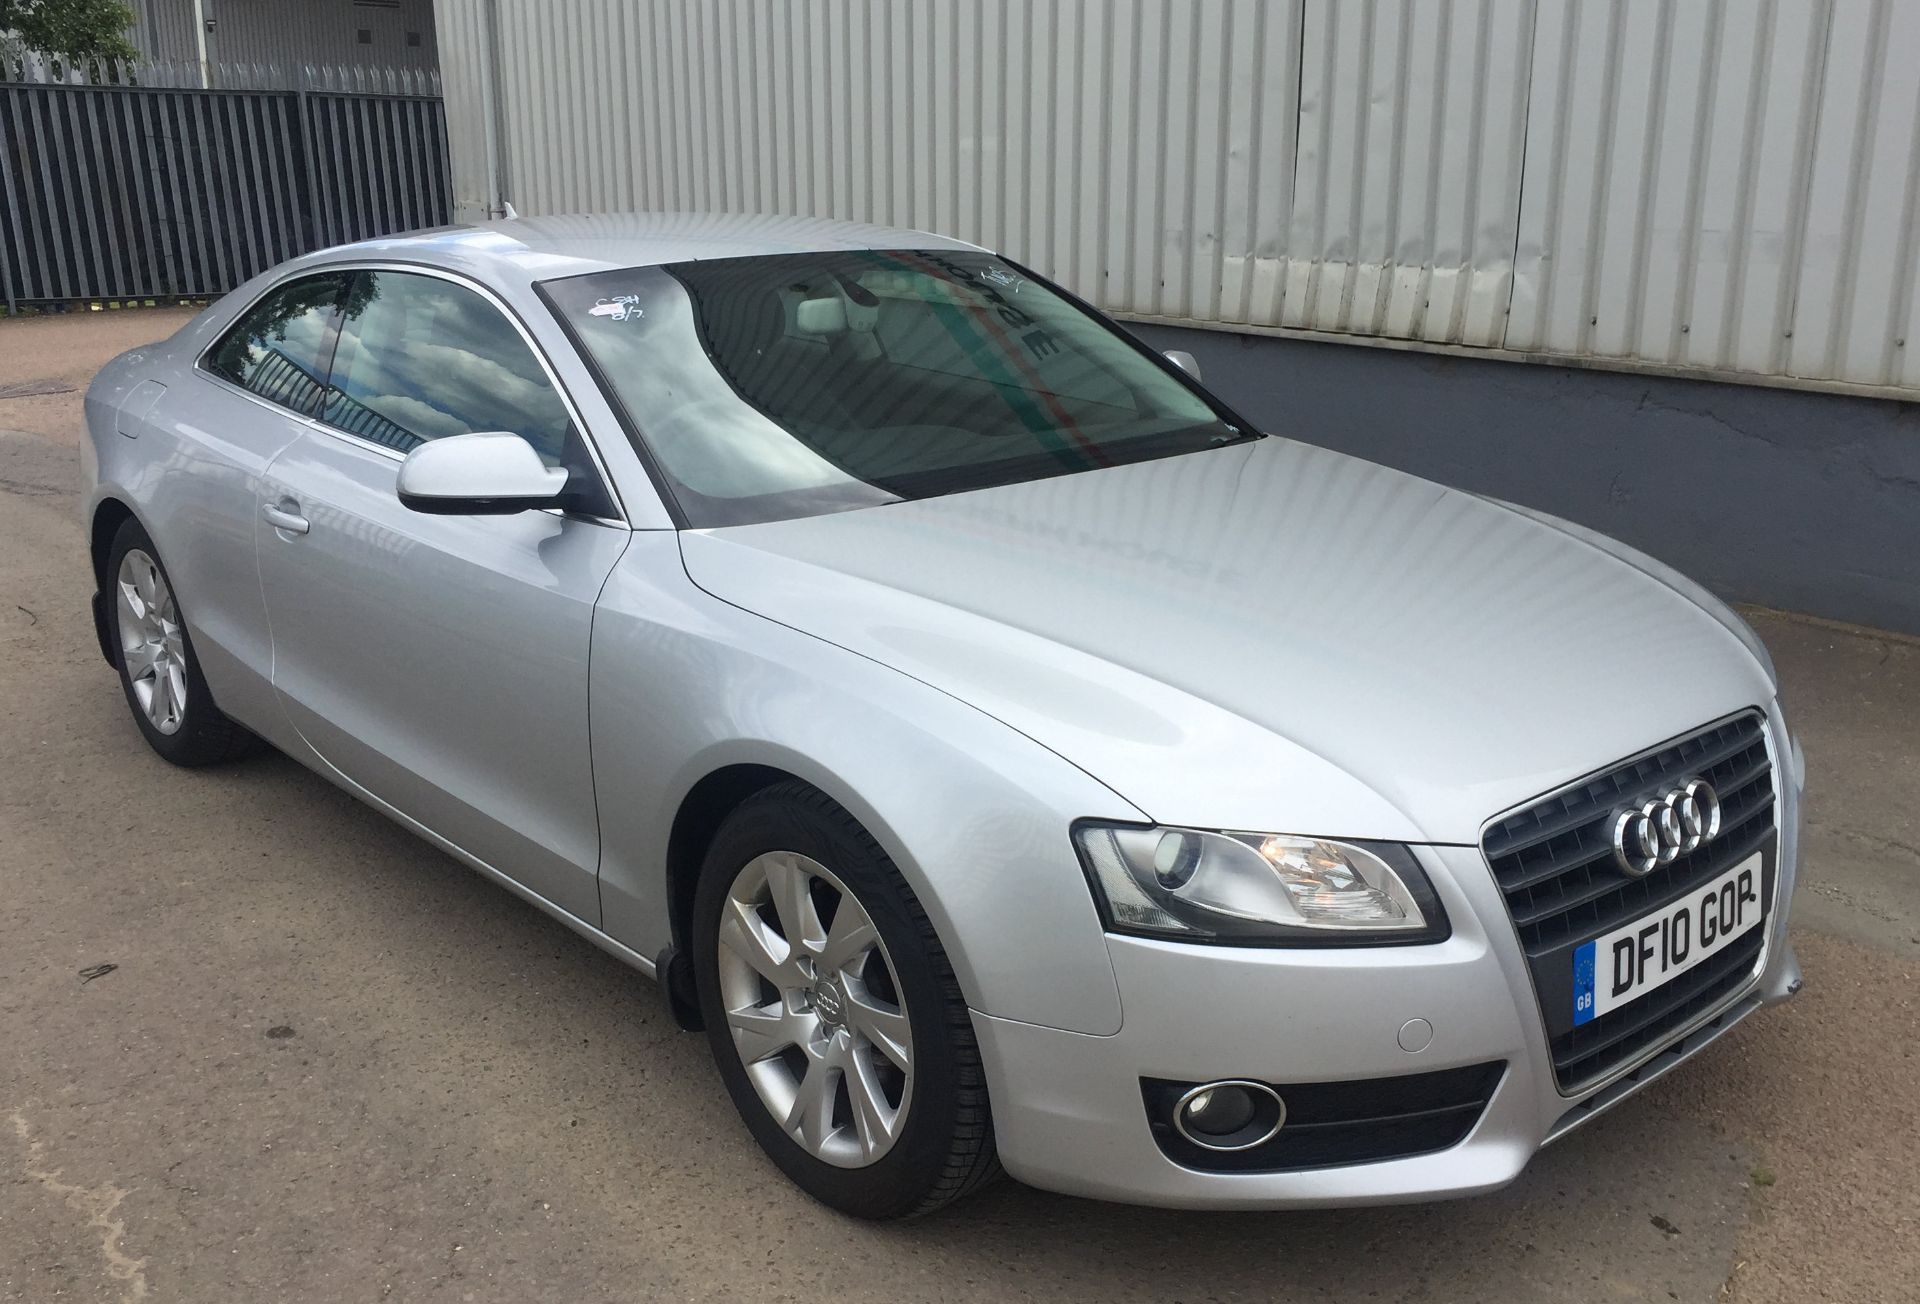 2010 Audi A5 2.0 TDI SE 2 Dr Coupe - CL505 - NO VAT ON THE HAMMER - Location: